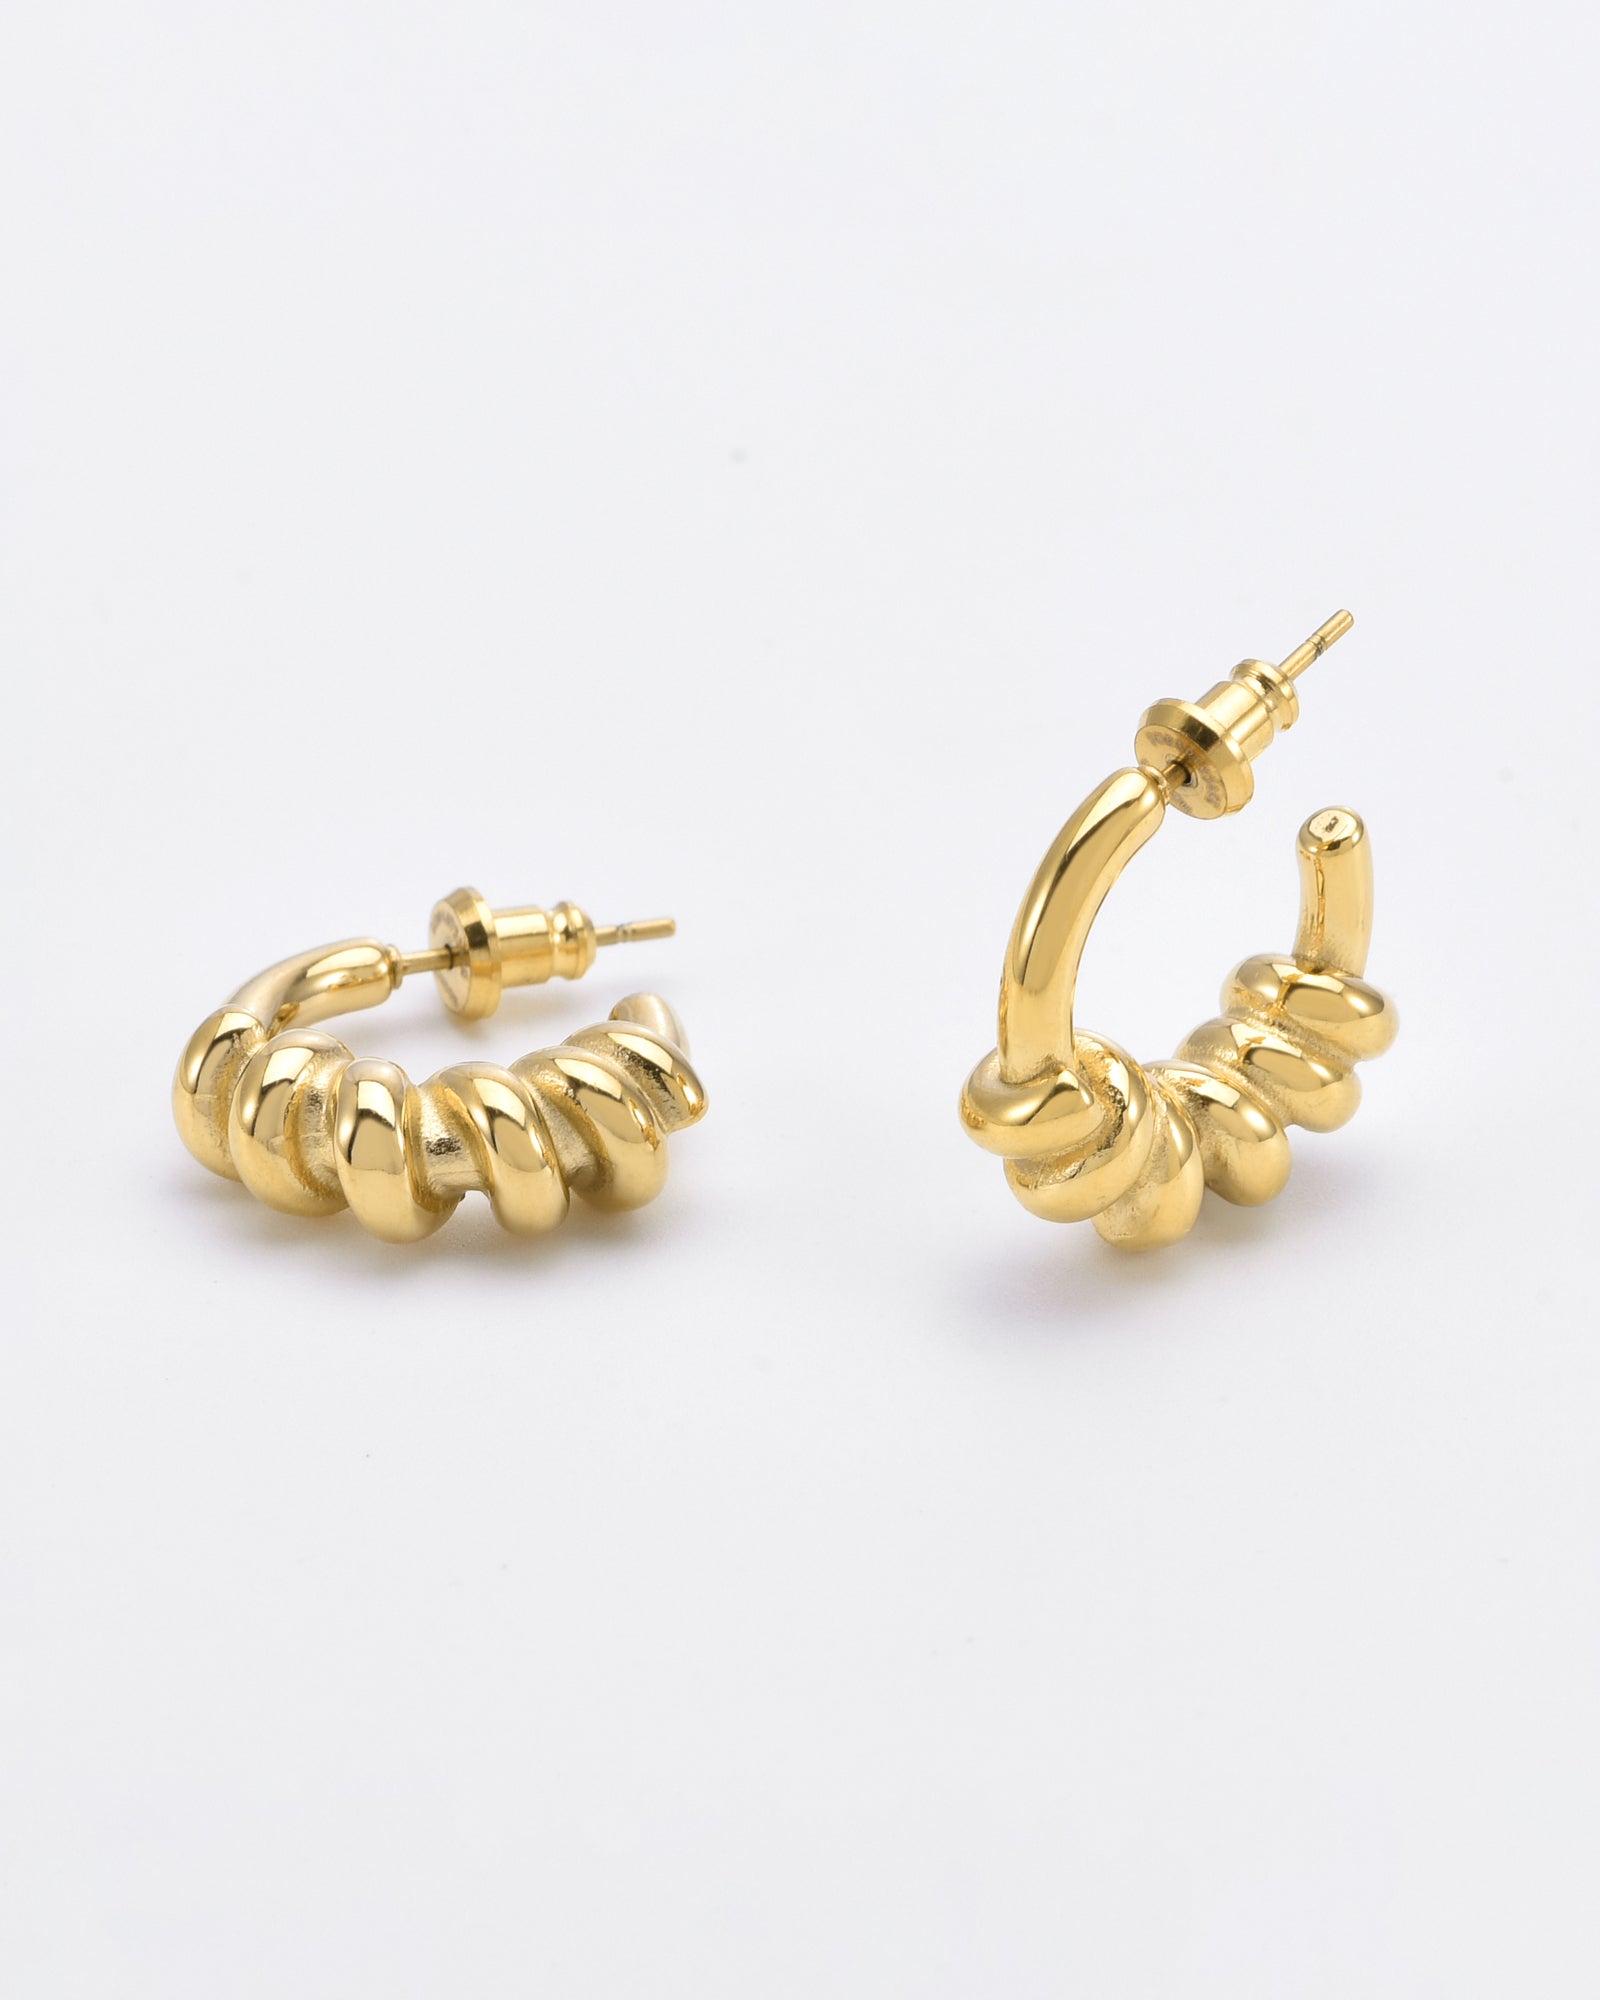 A pair of Swirl Earrings Gold by For Art's Sake® with a unique spiral design. These hypoallergenic earrings have a glossy finish and are displayed on a plain white background. One earring is resting on its side, while the other stands upright, showing the stud and back closure.